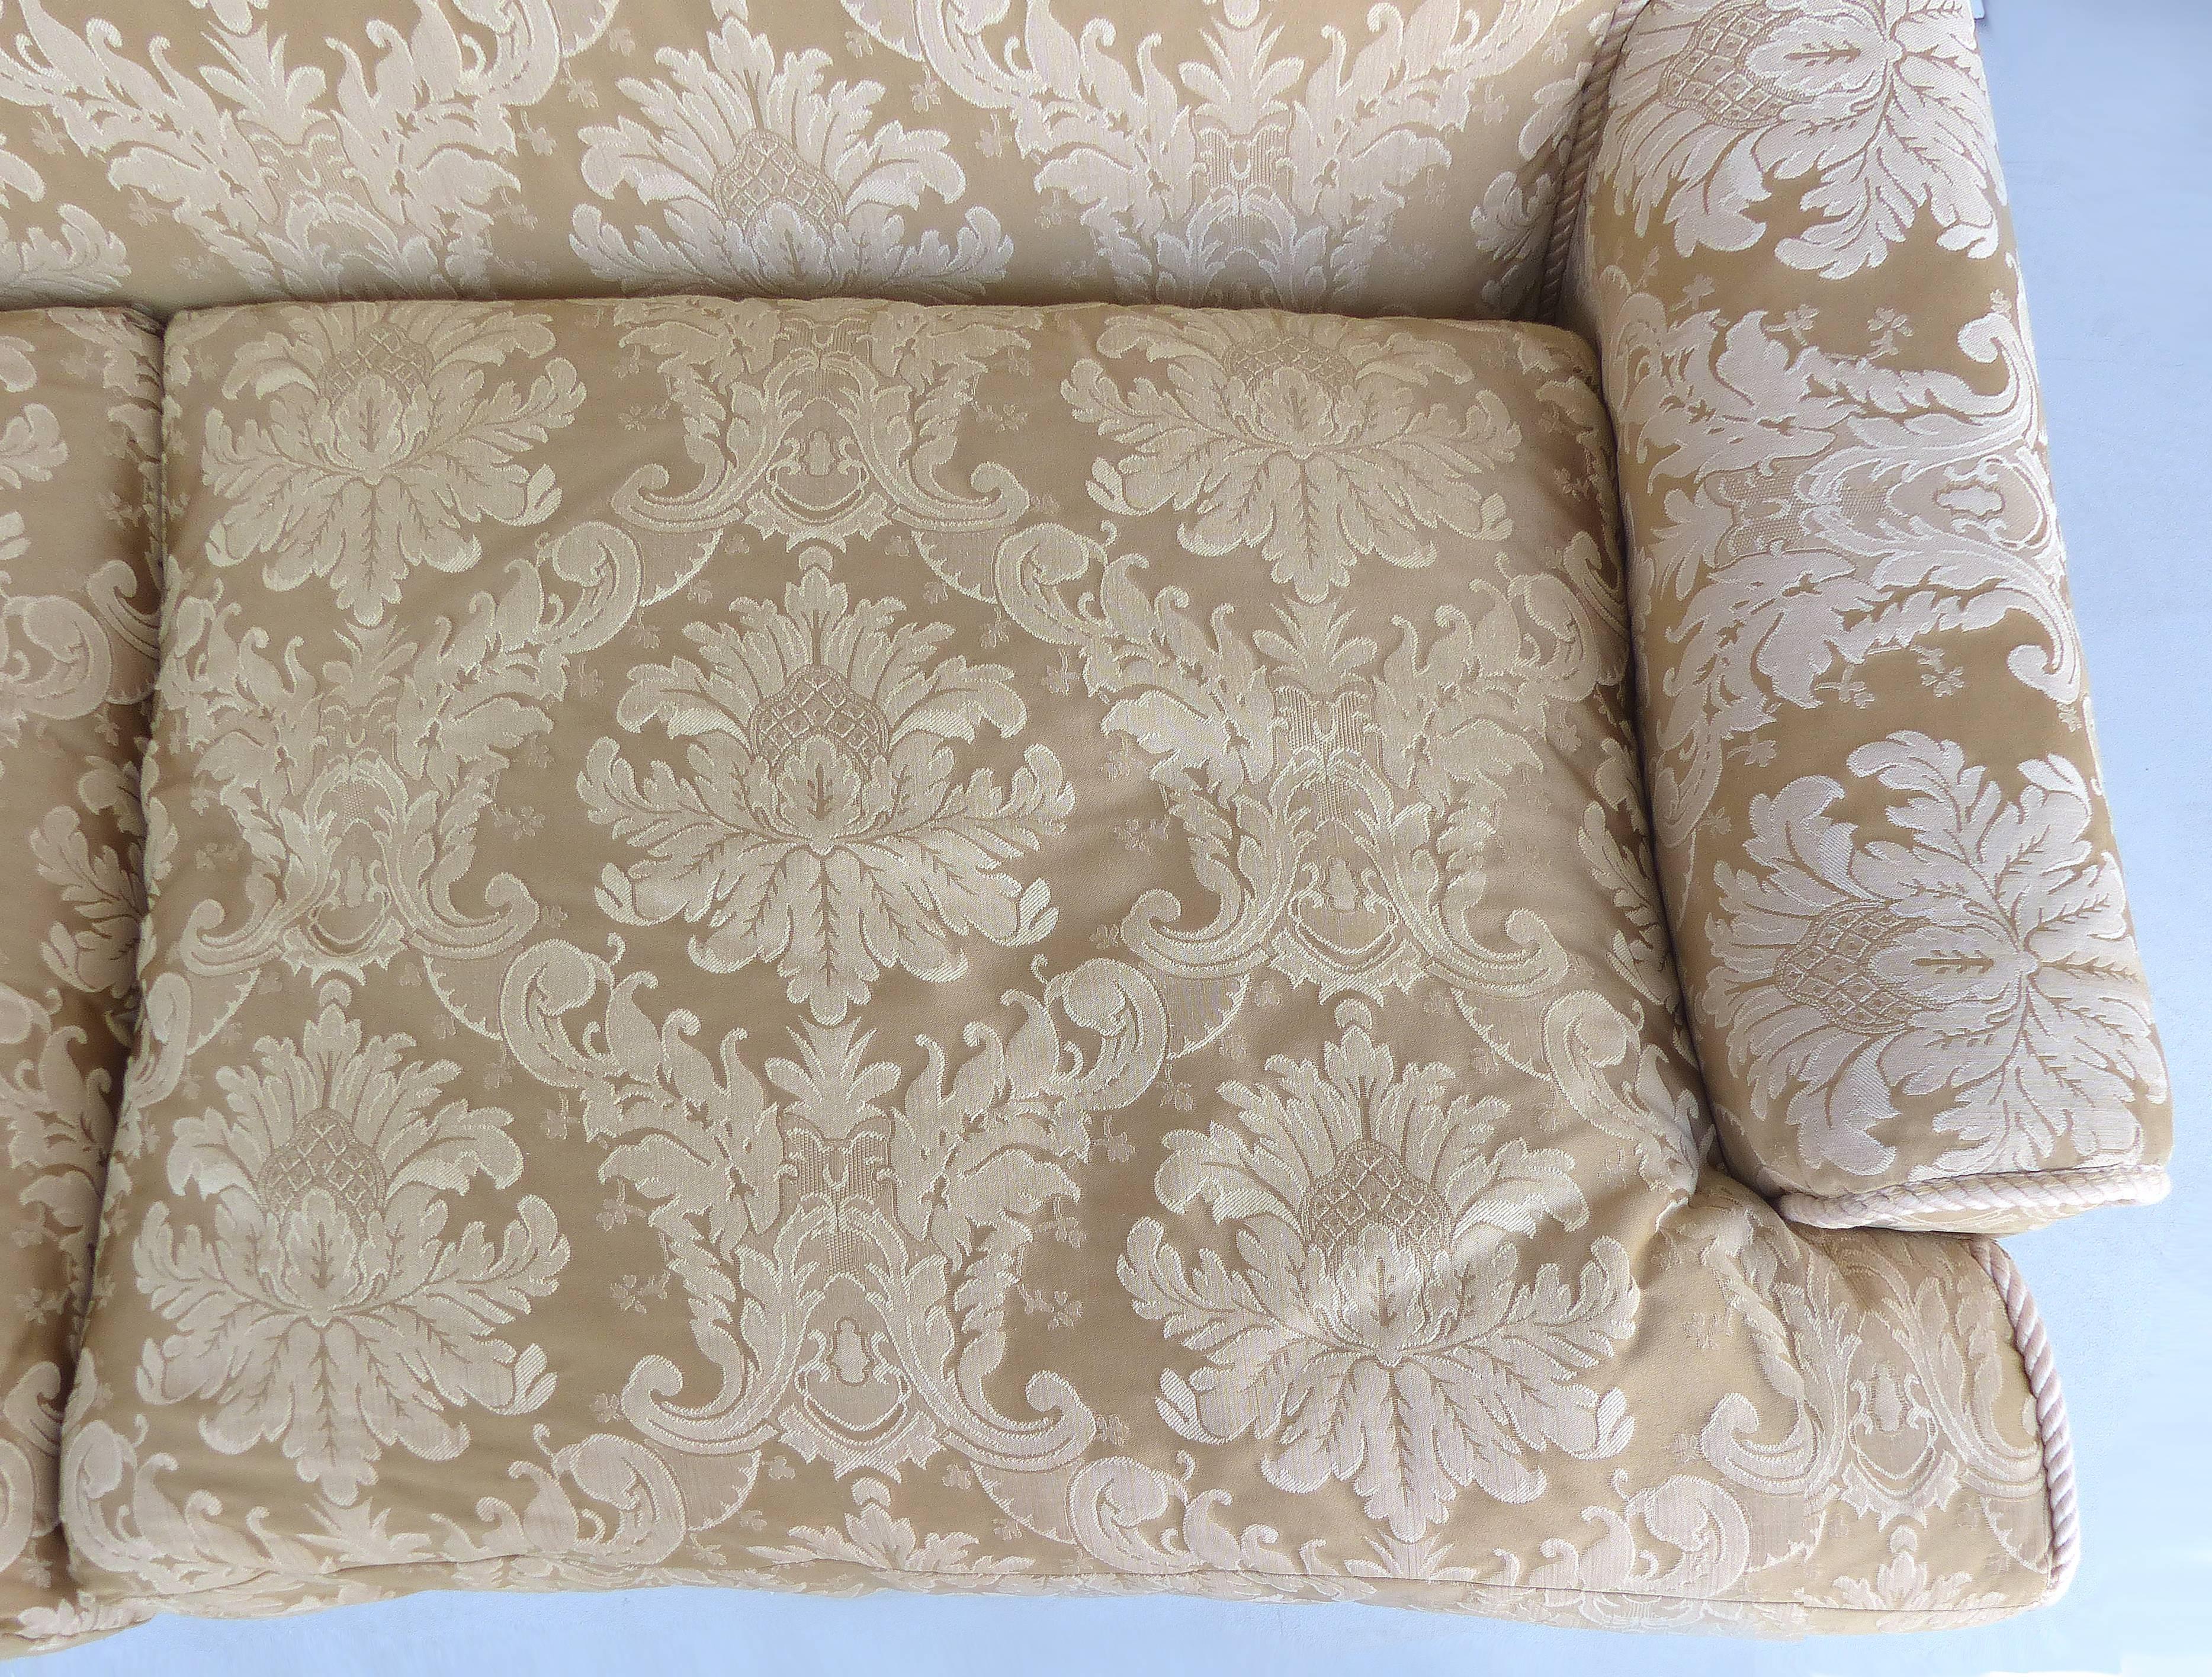 20th Century Damask Upholstered Plush Sofa with Rope Trim and Pleated Skirt